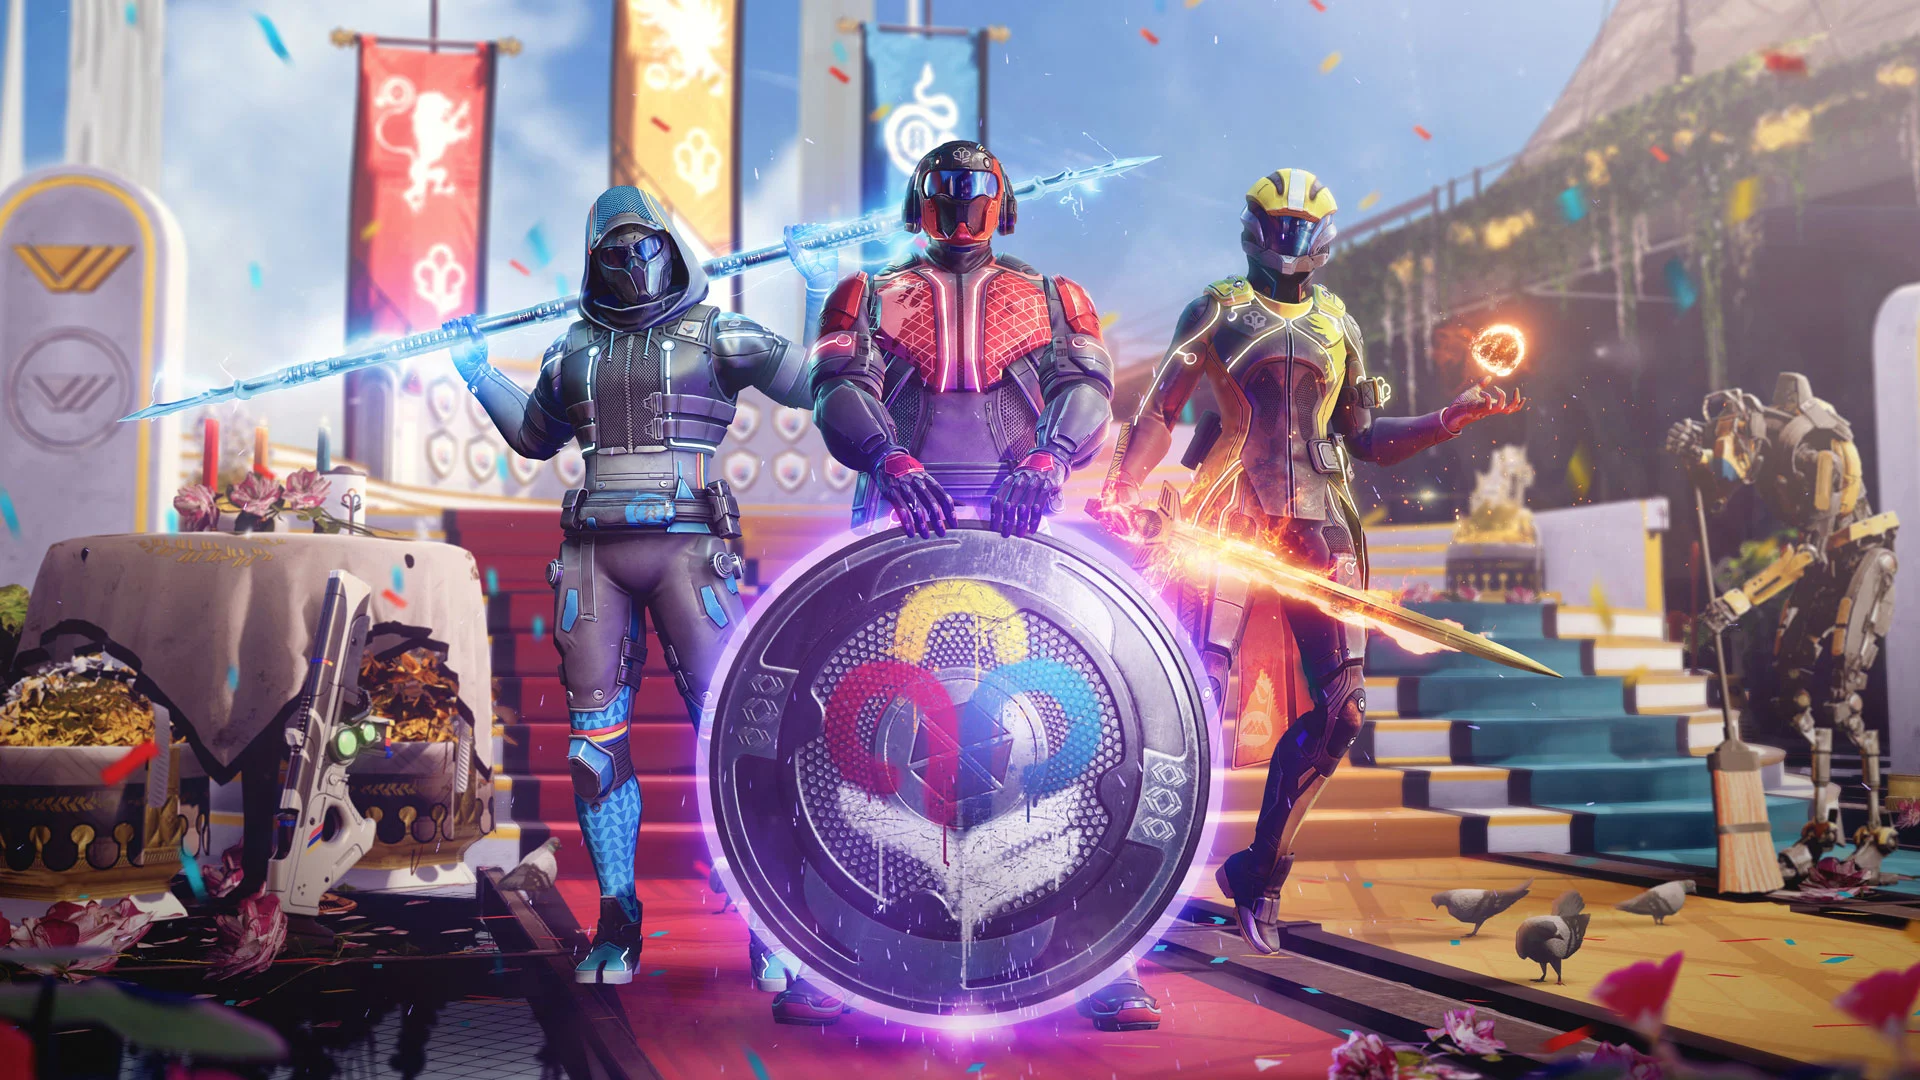 Guardian Games Return: Compete for Glory and Rewards in Destiny 2's Annual Event 8